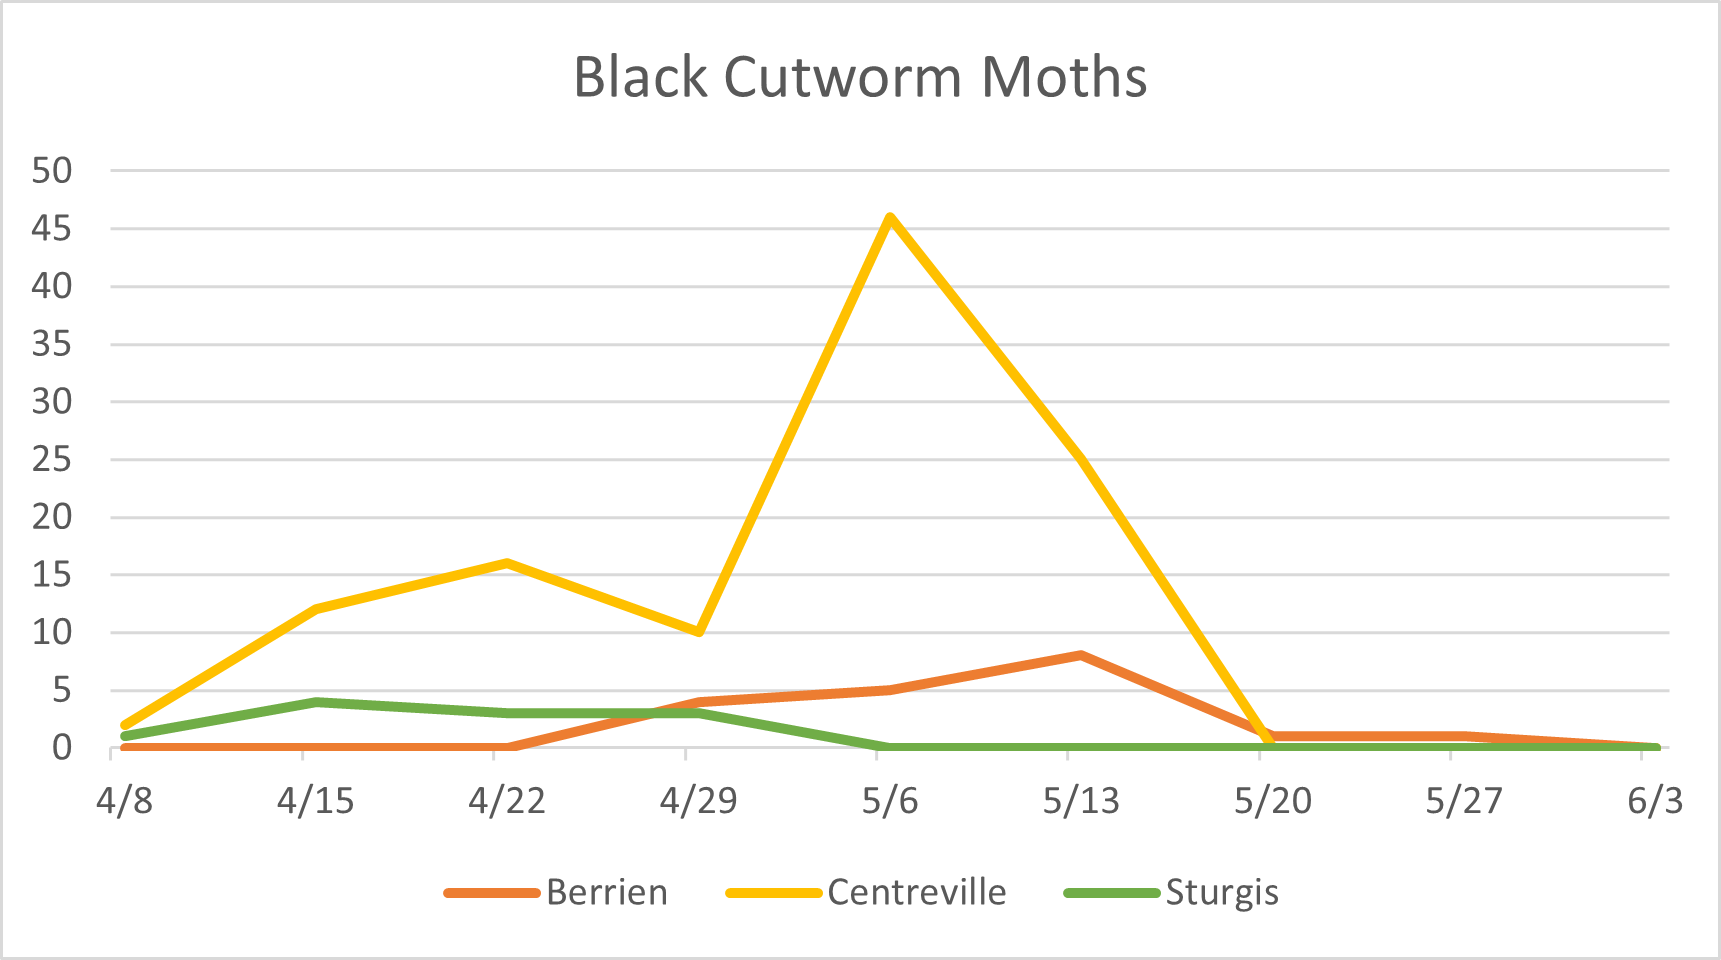 A graph showing black cutworm moth catches in Berrien, Centreville and Sturgis.